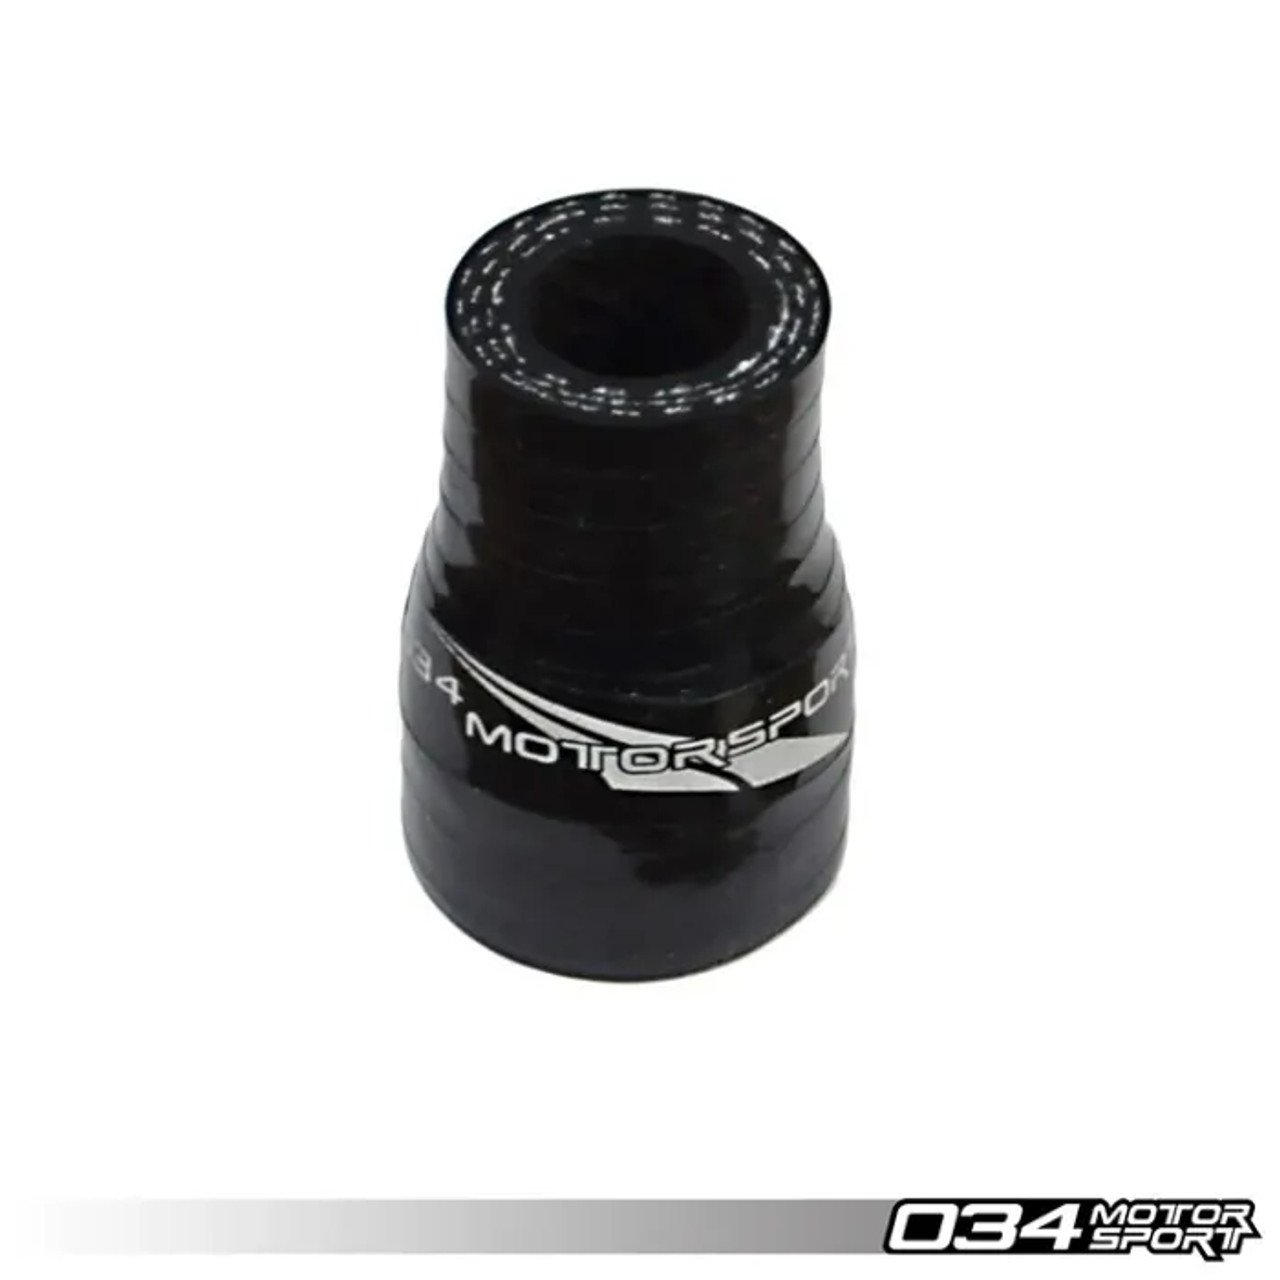 034Motorsport Silicone Check Valve Inlet Hose for B5 & C5 2.7T & 4.2T